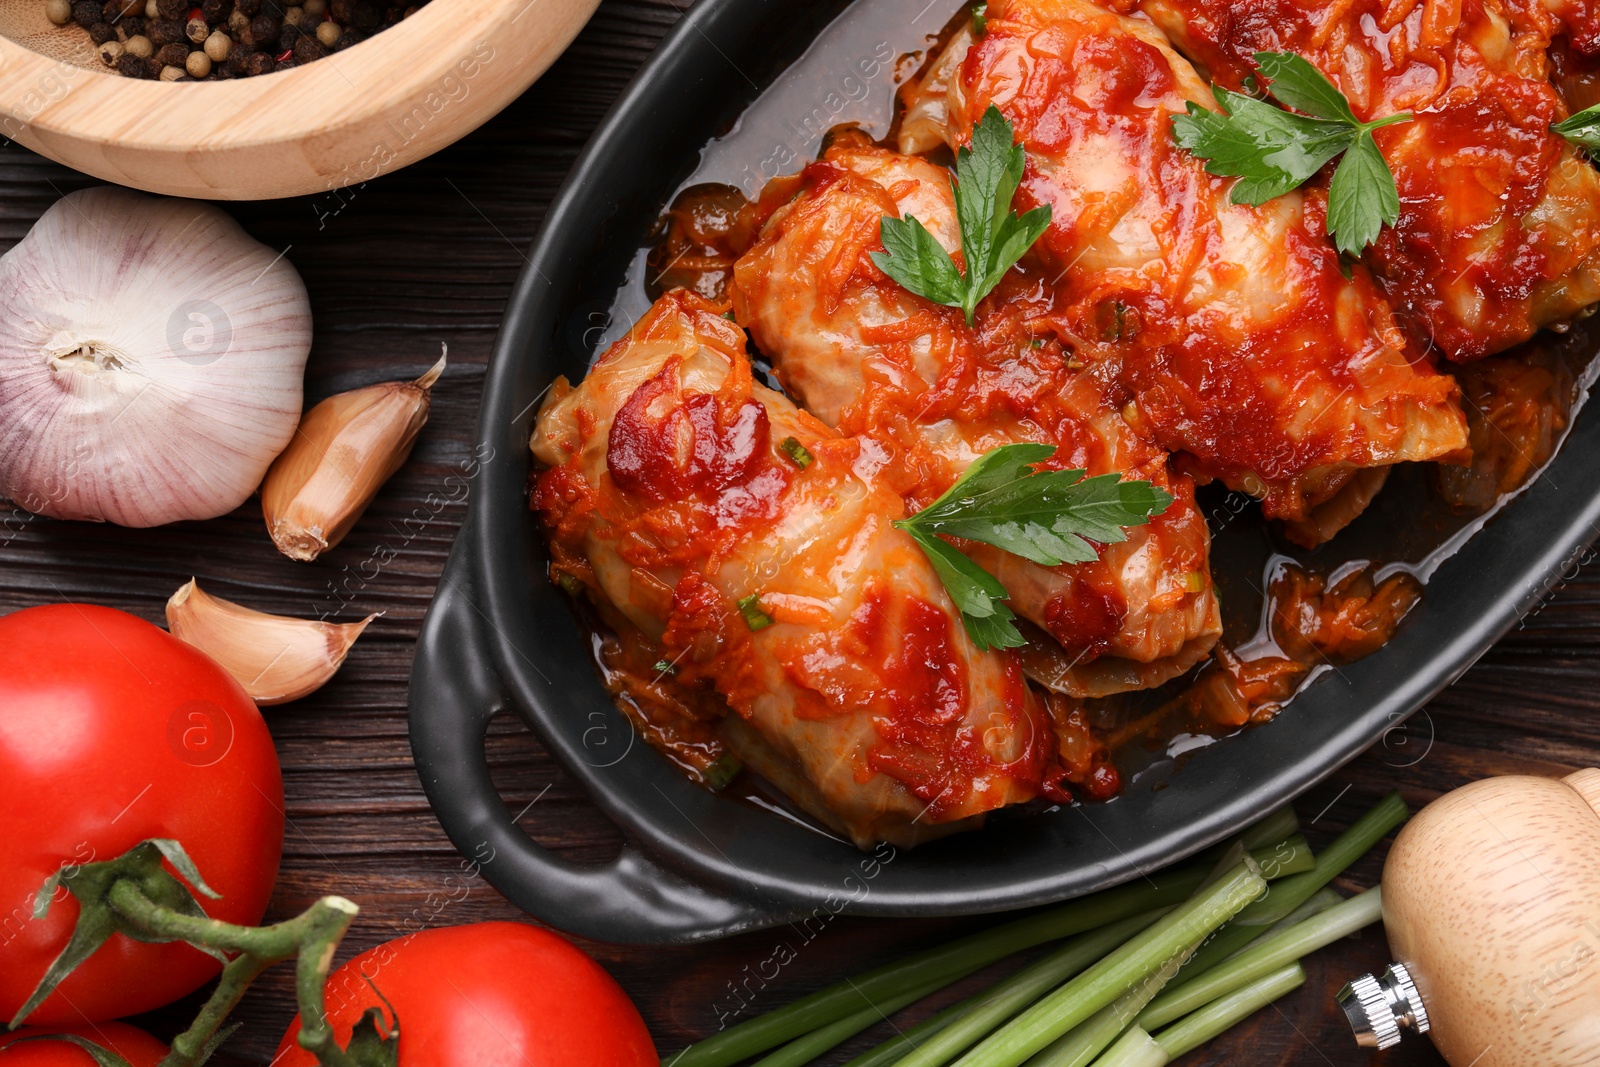 Photo of Delicious stuffed cabbage rolls cooked with tomato sauce and ingredients on wooden table, flat lay